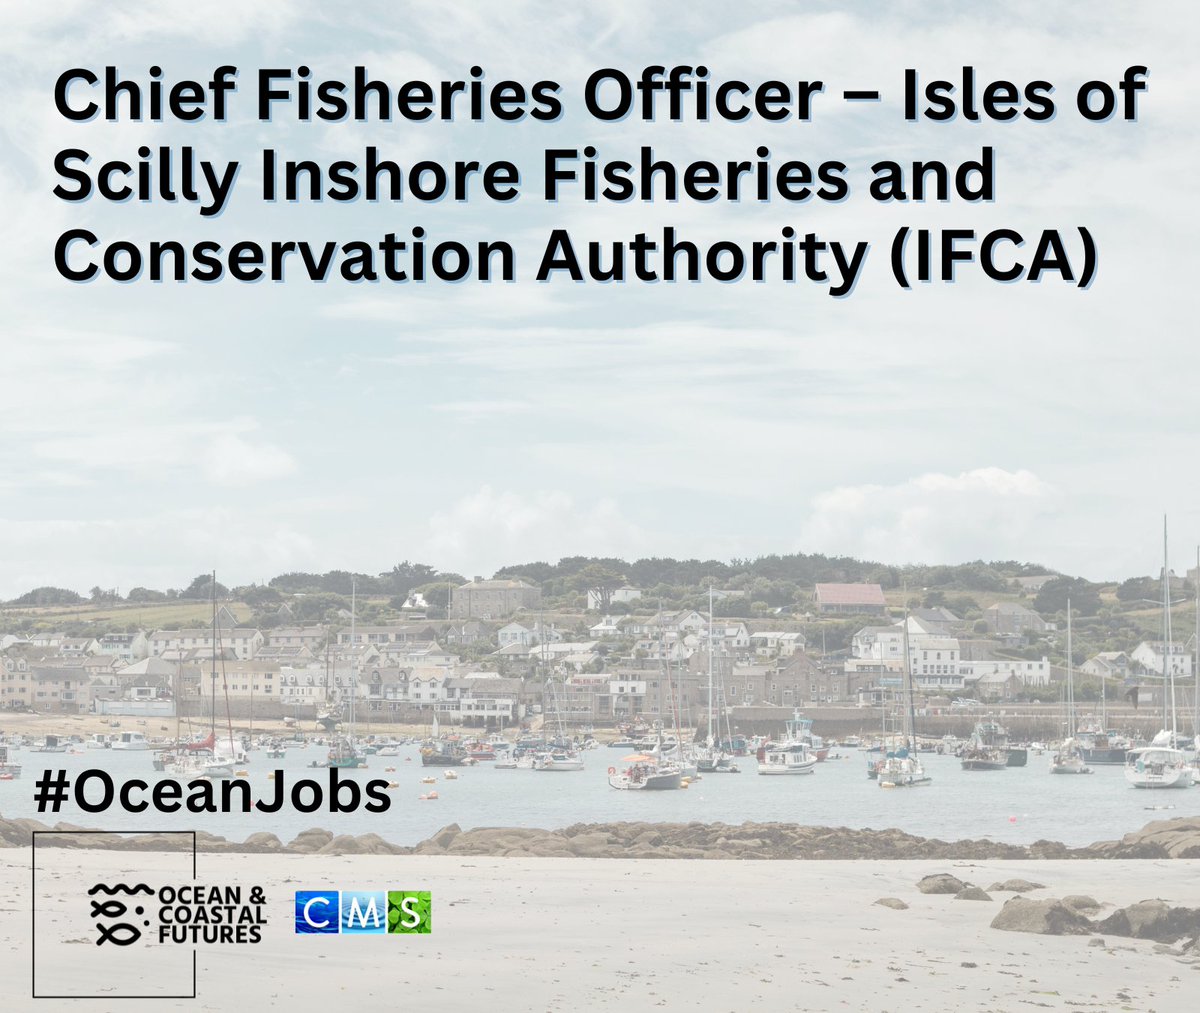 #job opportunity: Chief Fisheries Officer – @IoSIFCA ▪️Closes: 1 April ▪️Location: St Mary's, Isles of Scilly ▪️Salary: £44,428 – £47,420 ▪️Full details here: cmscoms.com/?p=38271 ❗Sign up for our #OceanJobs alerts 👉 bit.ly/3MiyV7i #Vacancy